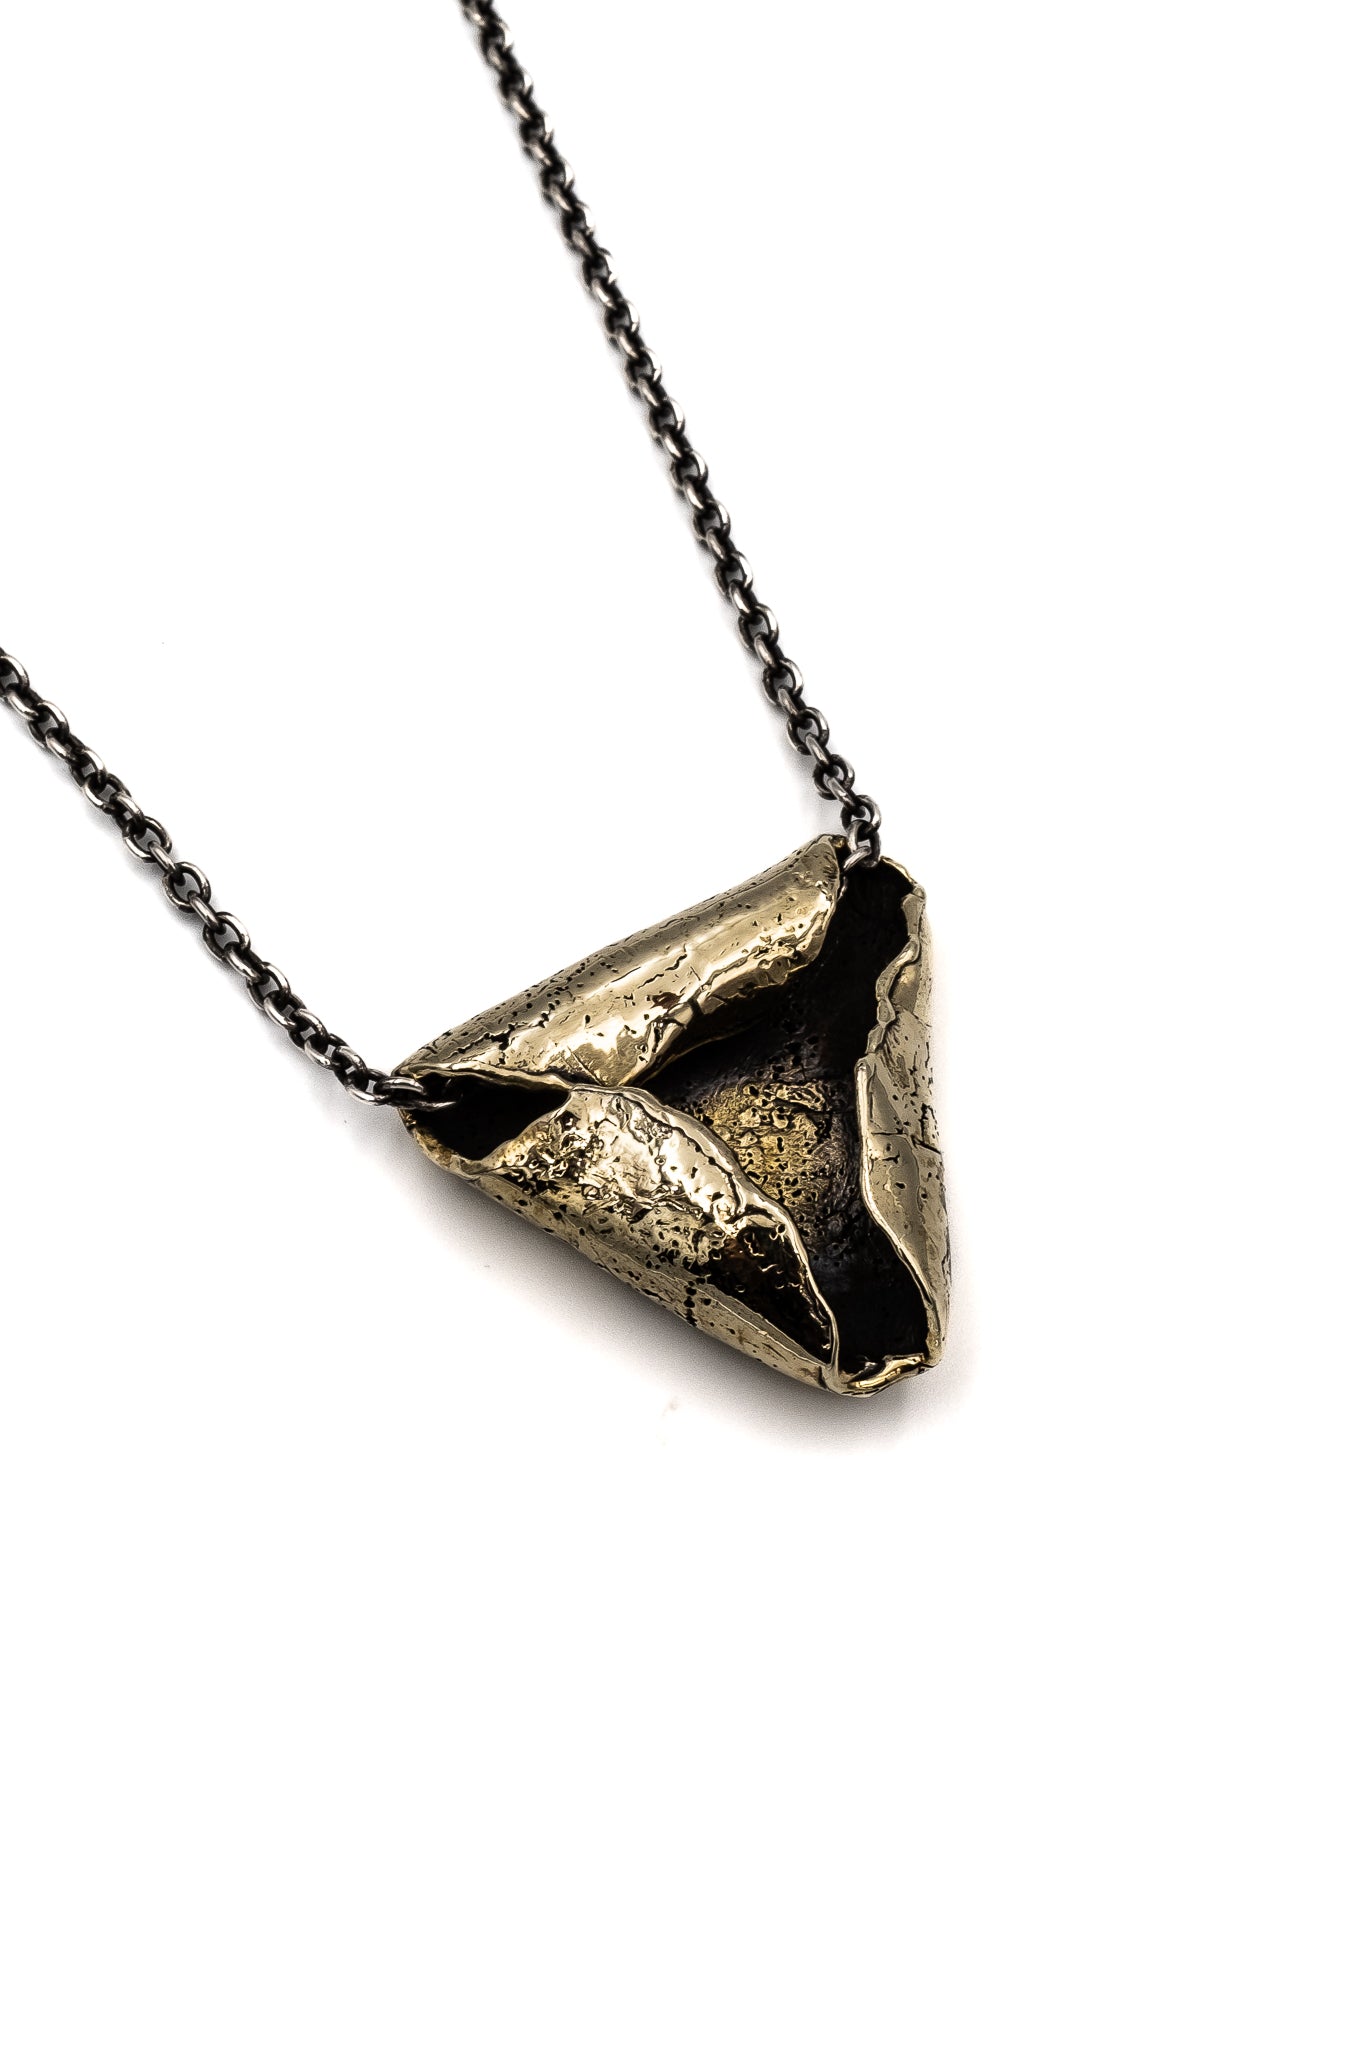 Crater Pendant in Brass